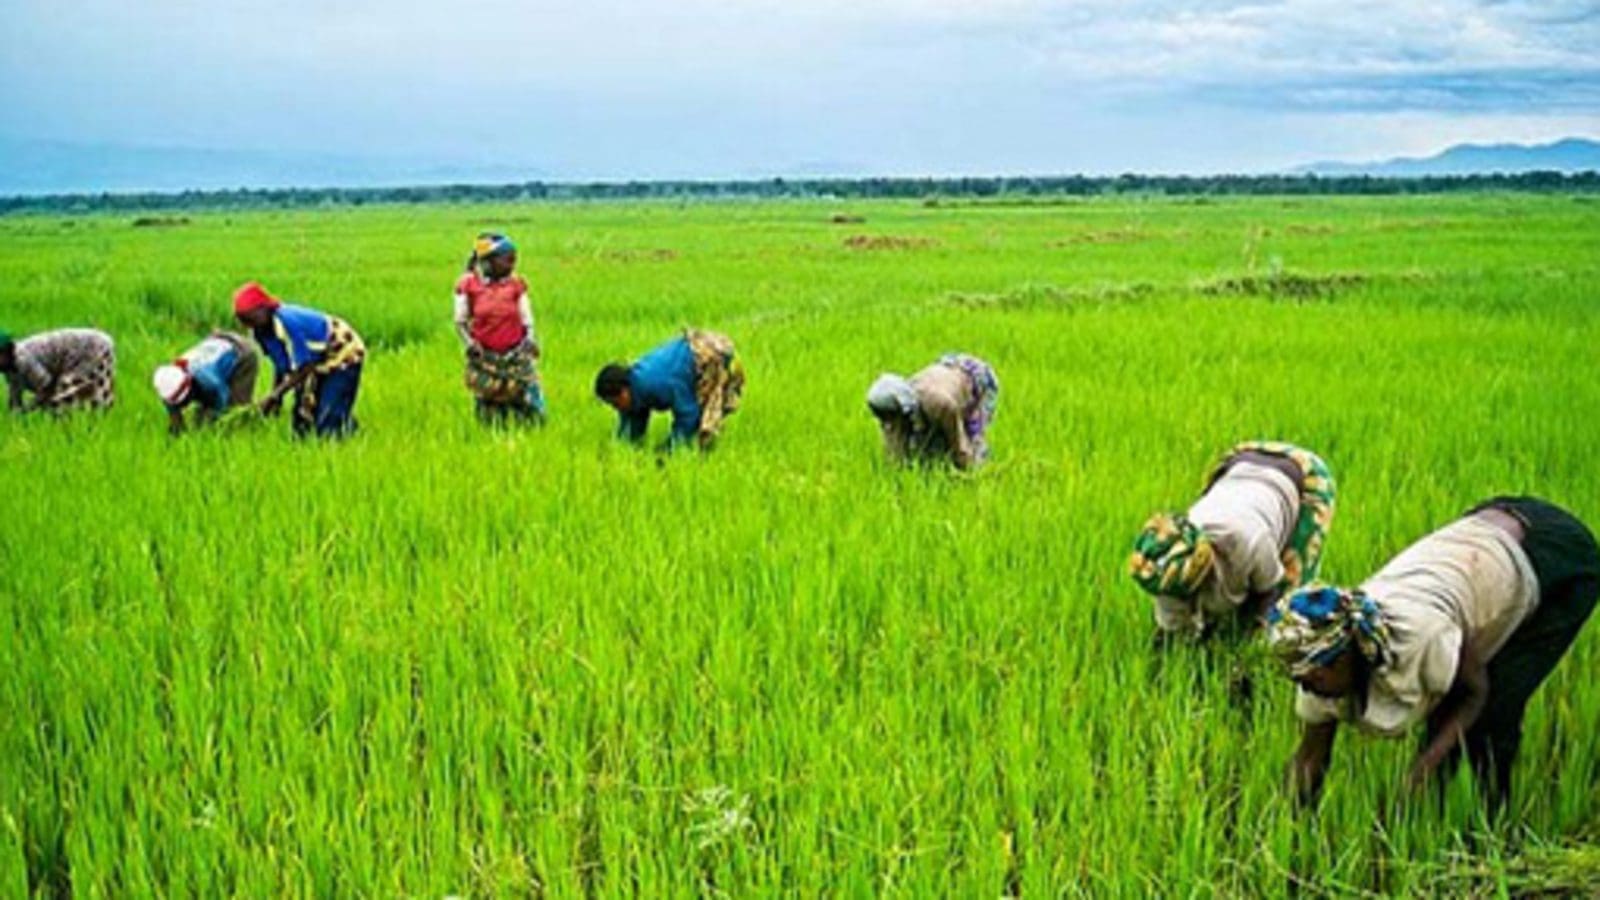 Zambia intensifies campaign to recruit more farmers into rice production to meet local demand